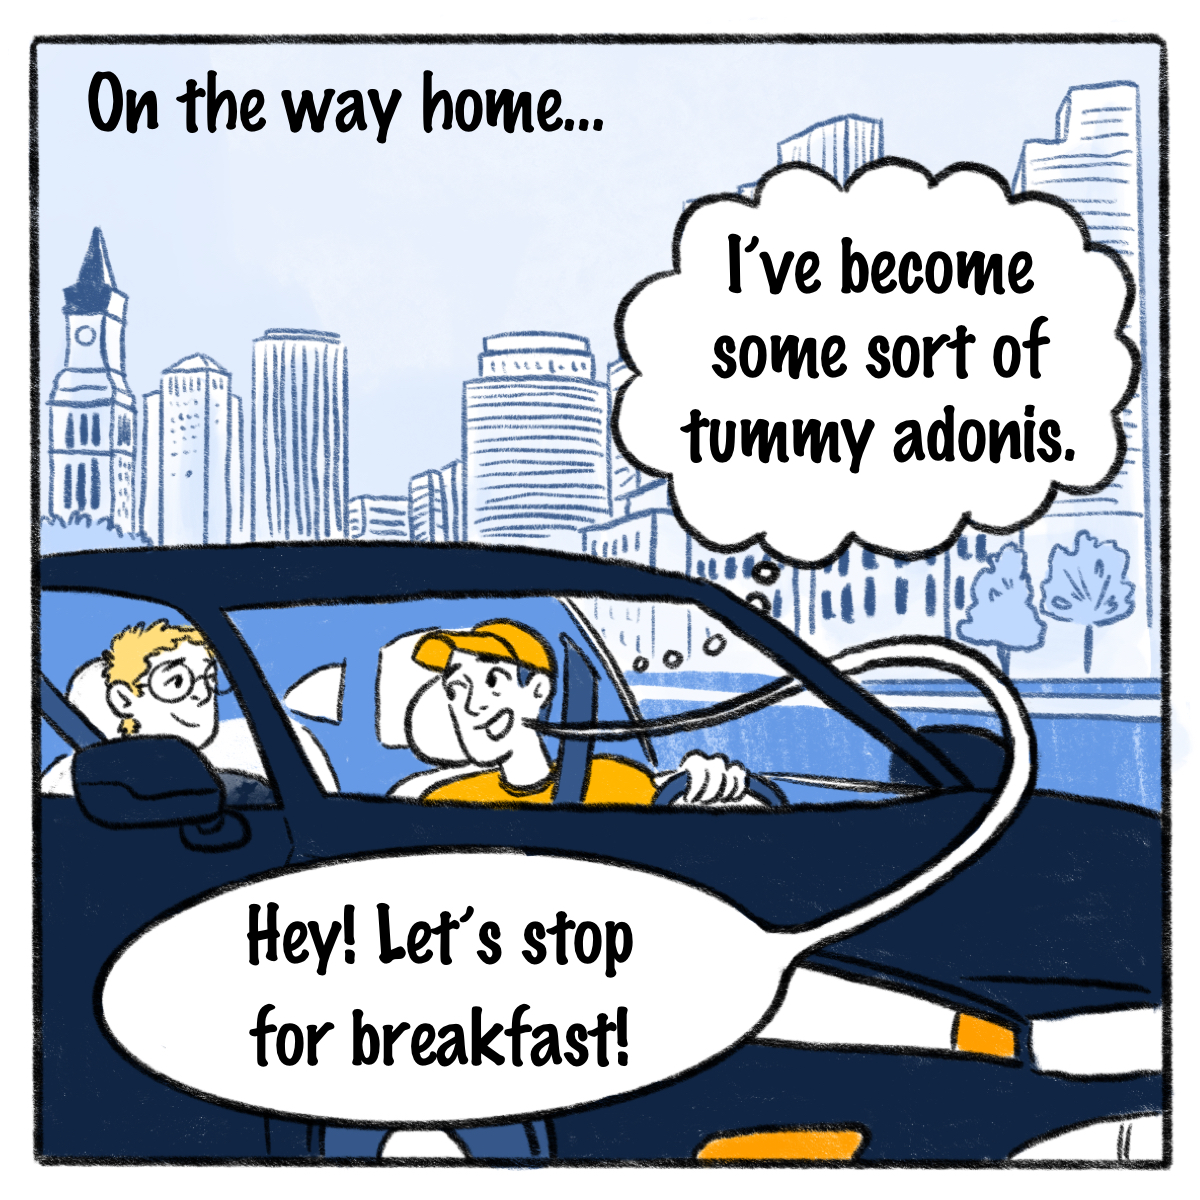 Two people in a car are driving away from the city, "on the way home..." is displayed at the top, a thought bubble says "I've become some sort of tummy adonis." and a speech bubble says "Hey! Let's stop for breakfast!"